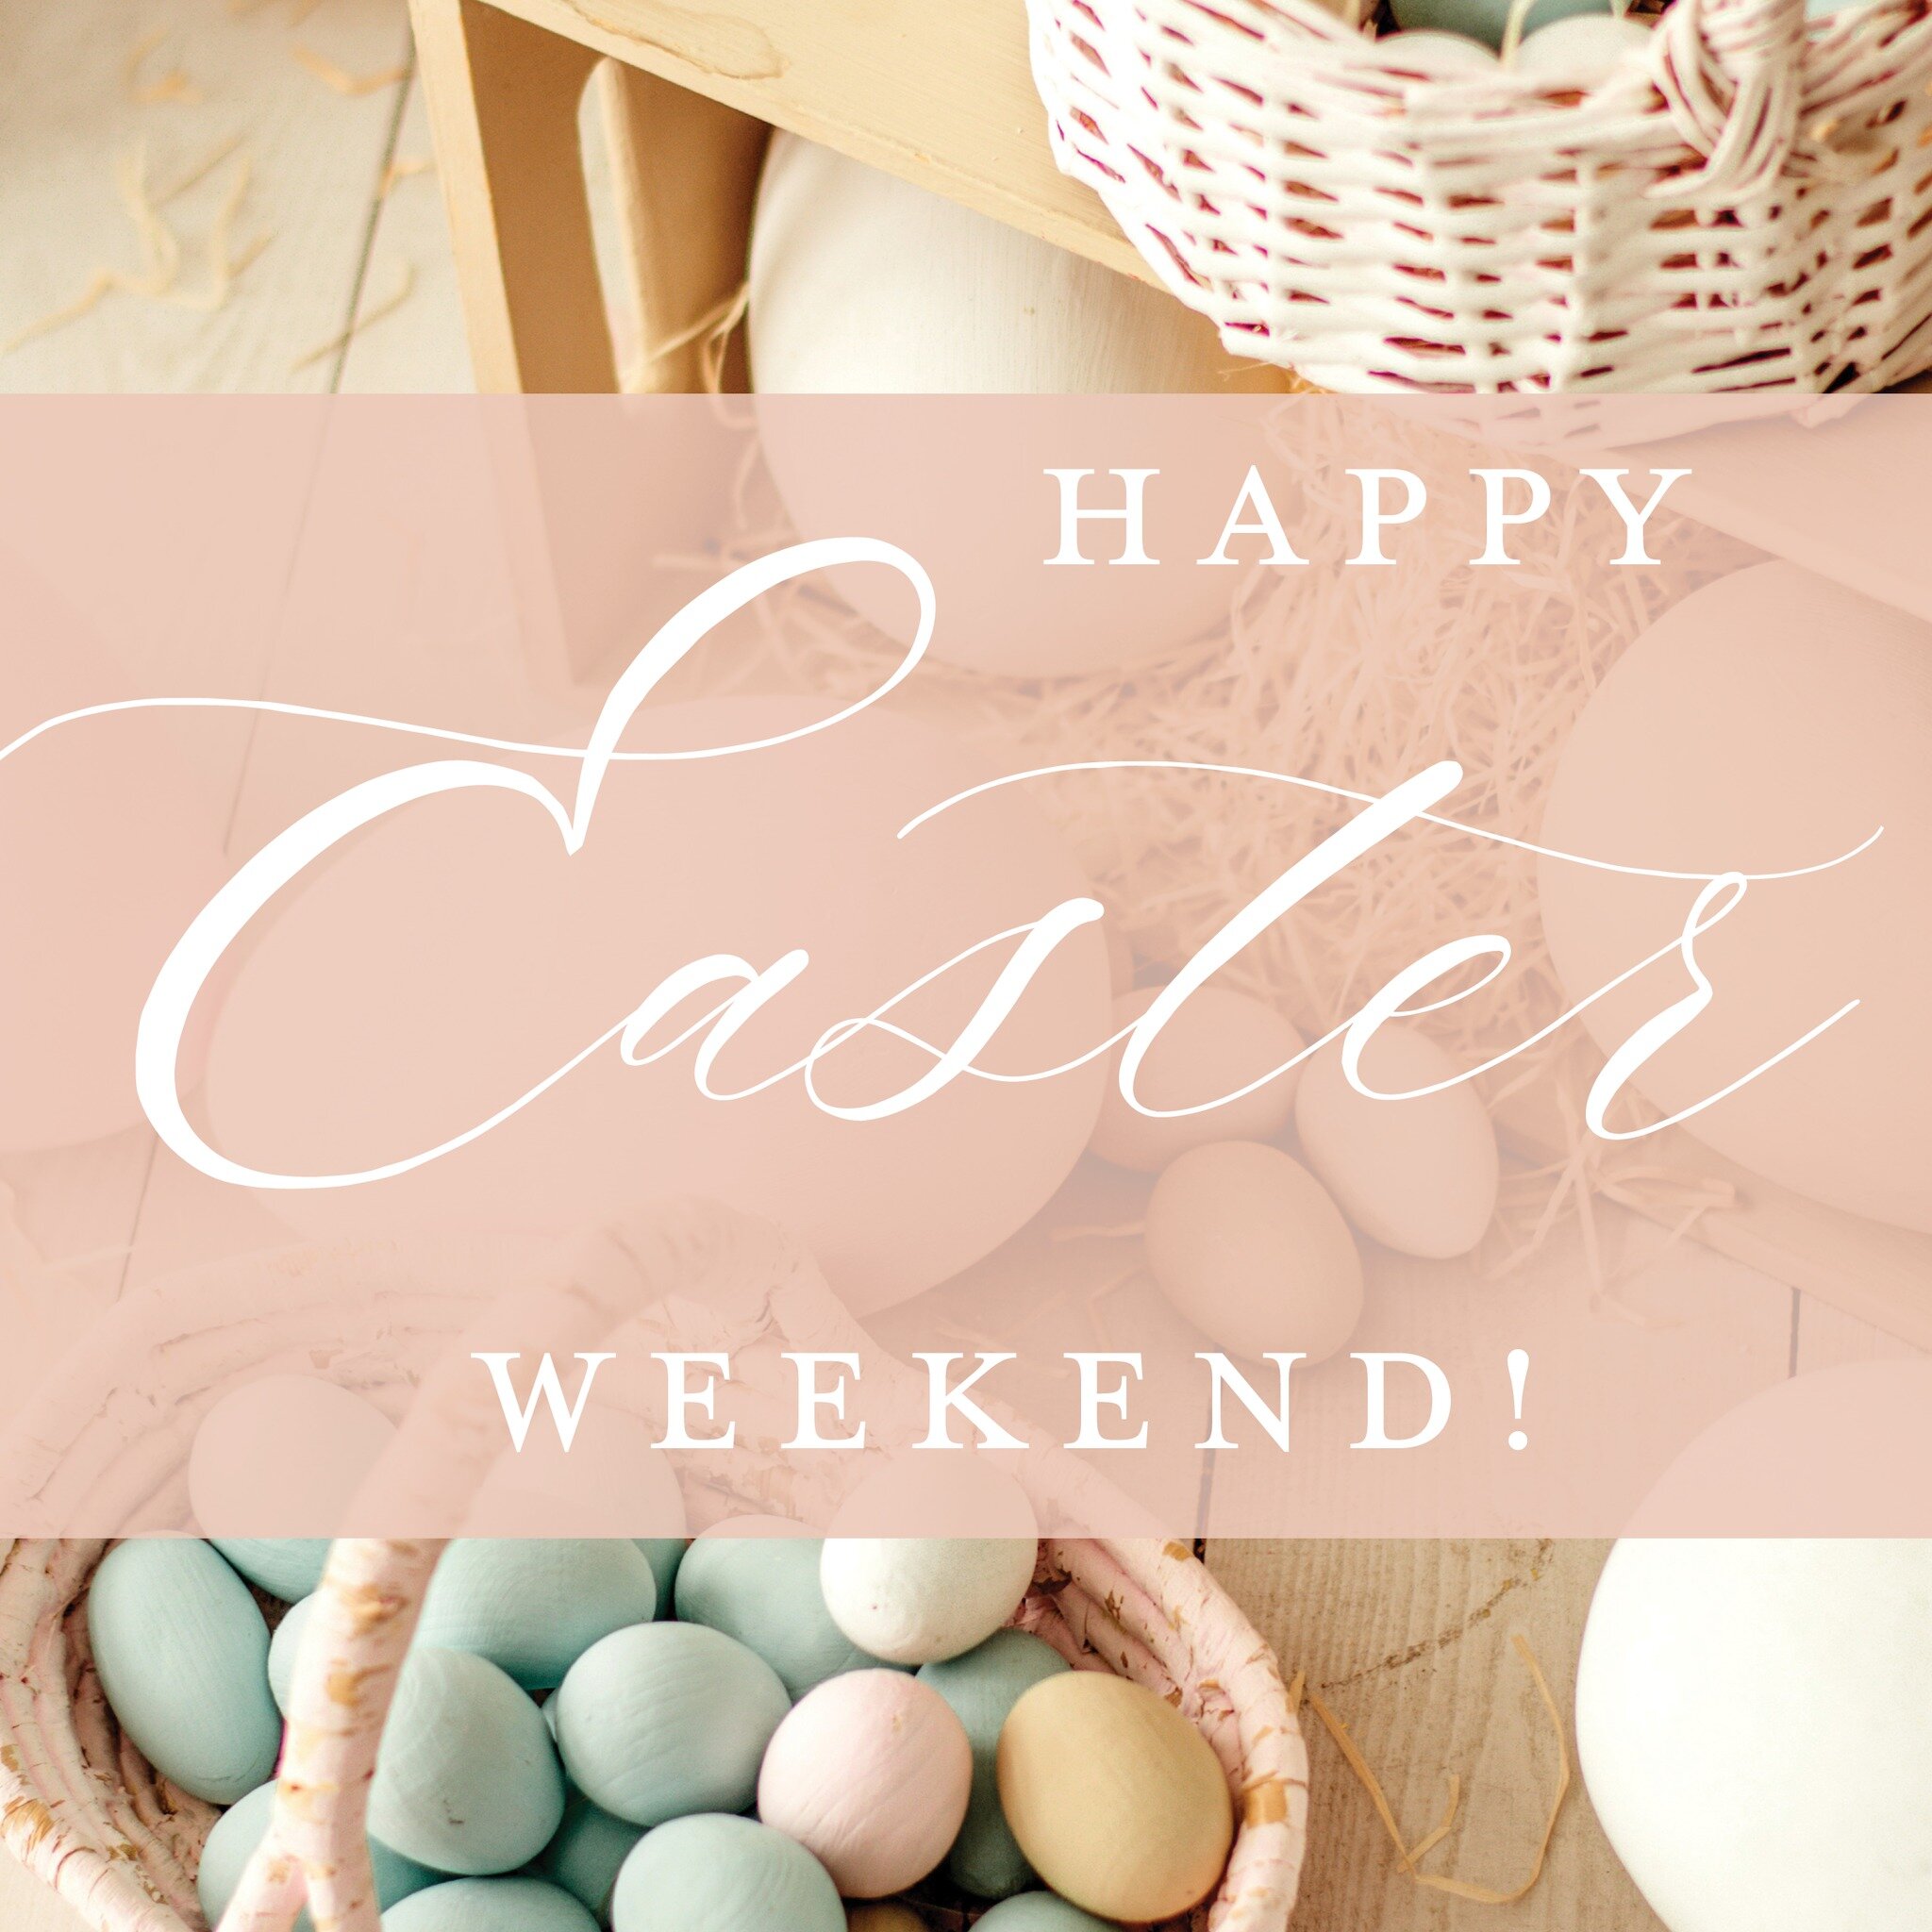 We will be closed on Friday, March 29th, to give our staff a much needed three day weekend! Happy Easter, everyone!